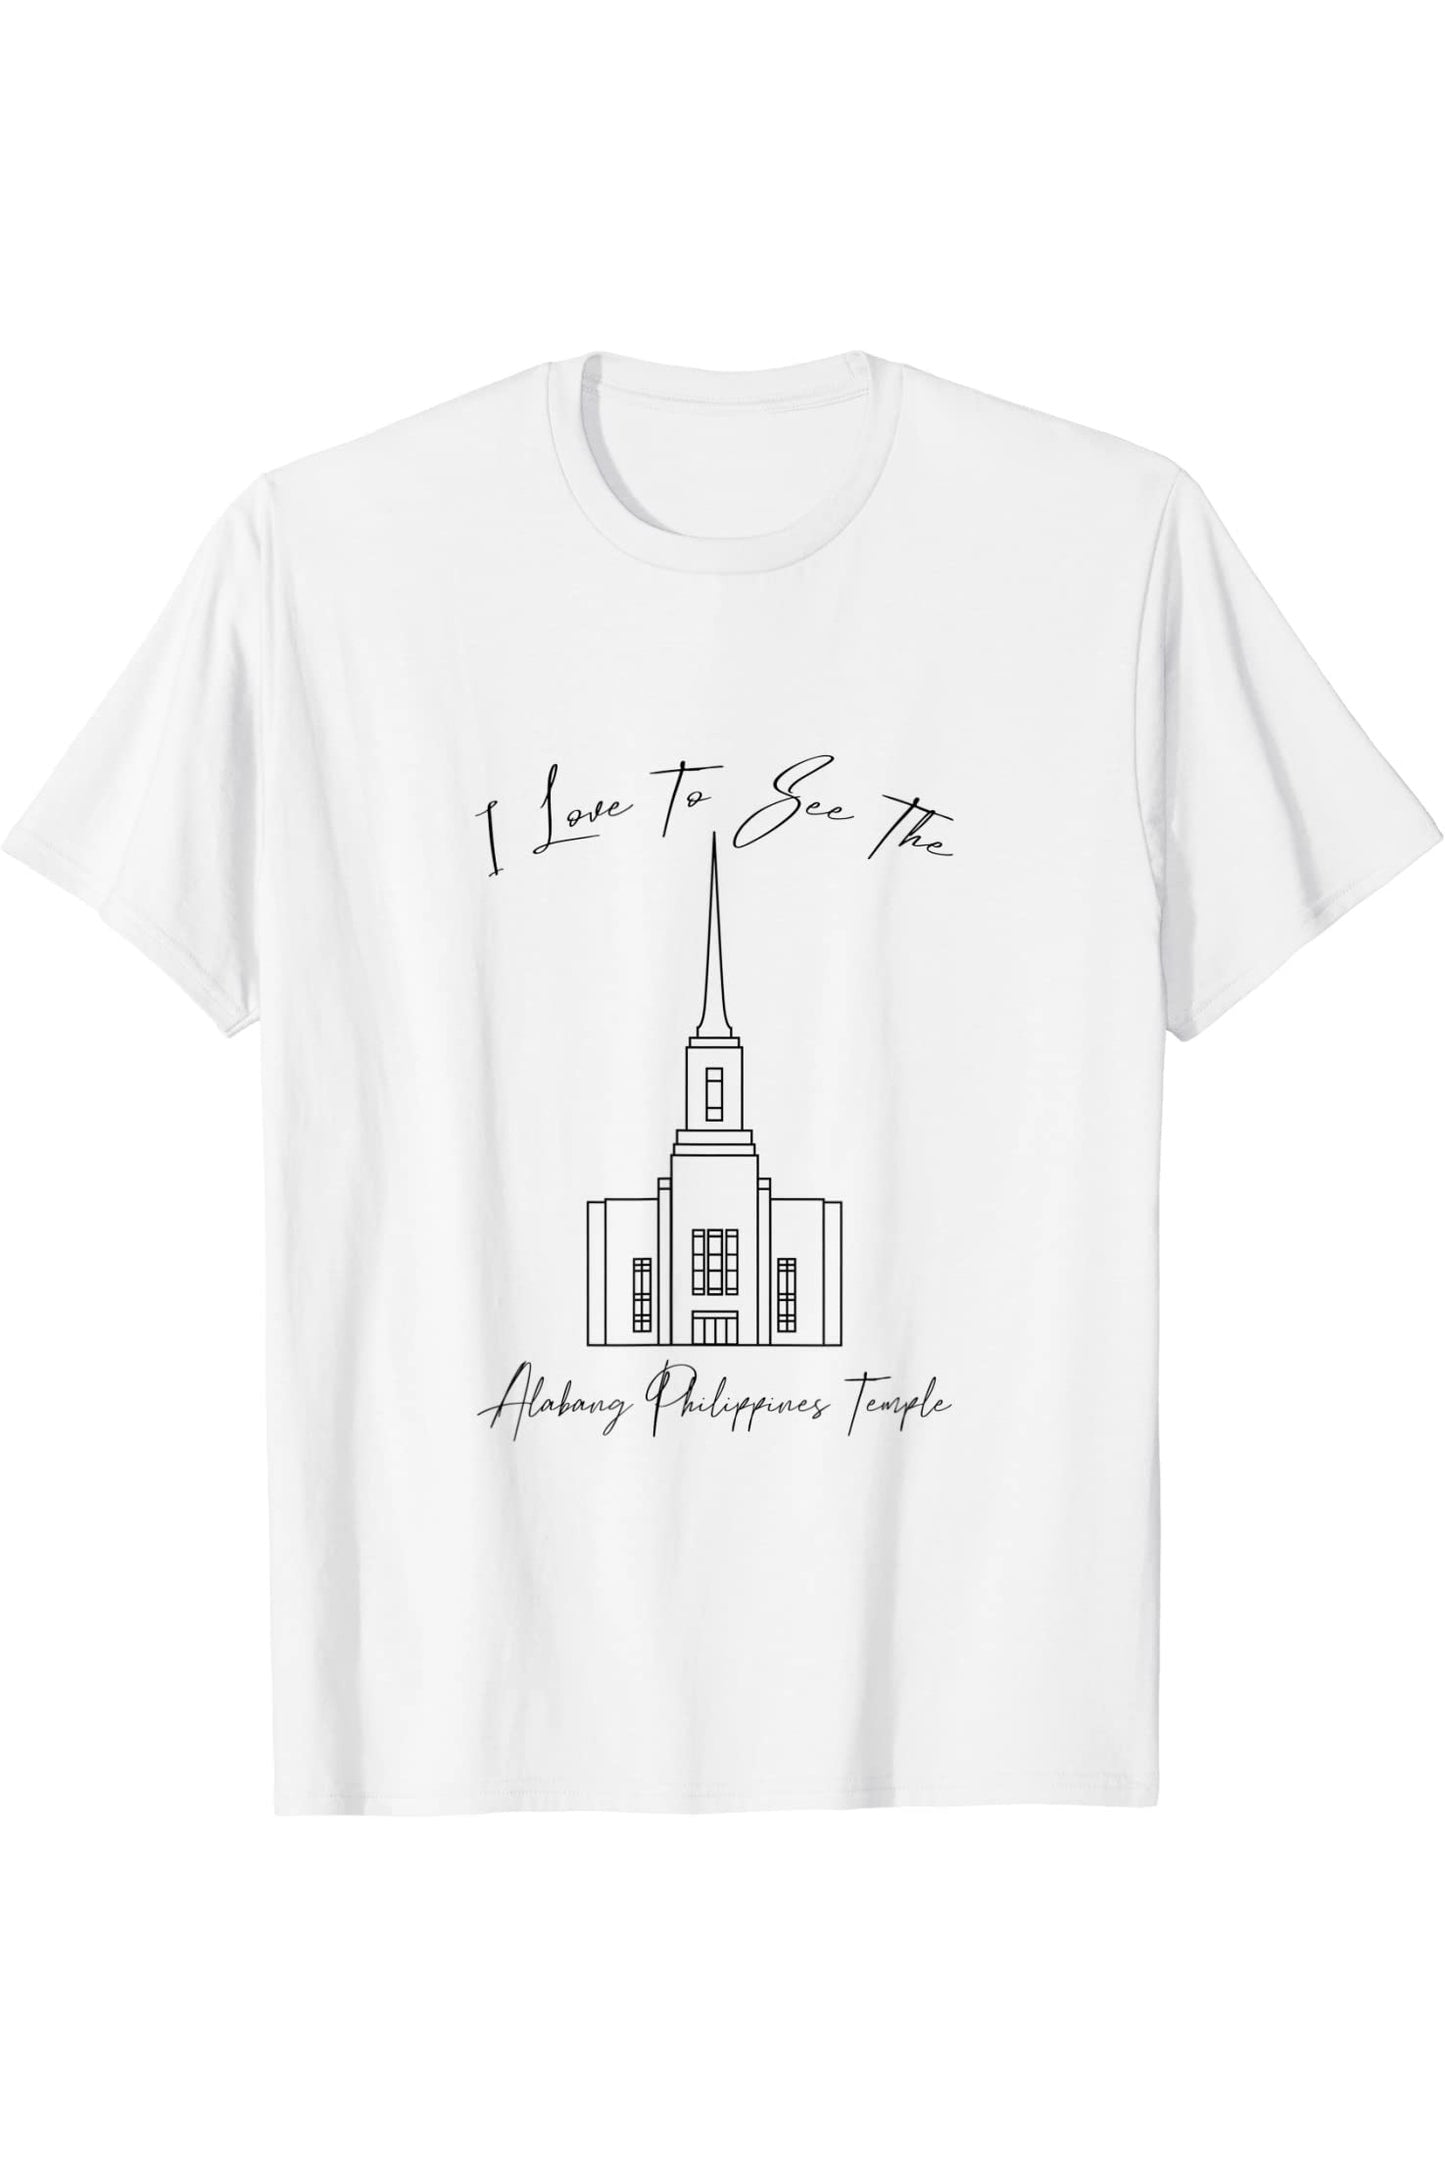 Alabang Philippines Temple T-Shirt - Calligraphy Style (English) US